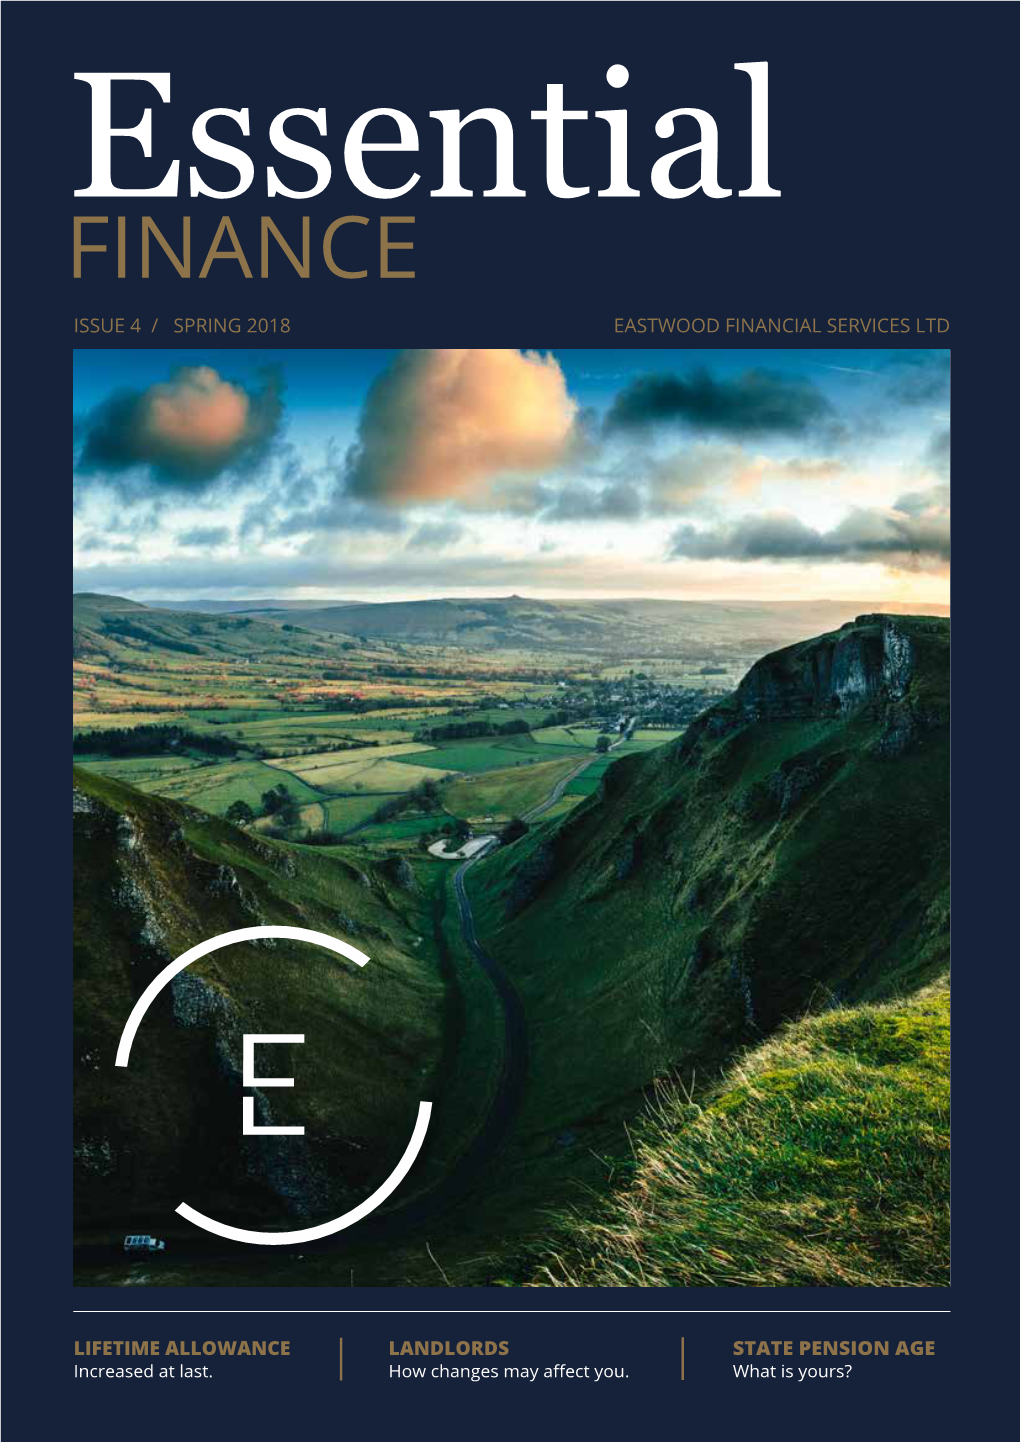 Finance Issue 4 / Spring 2018 Eastwood Financial Services Ltd